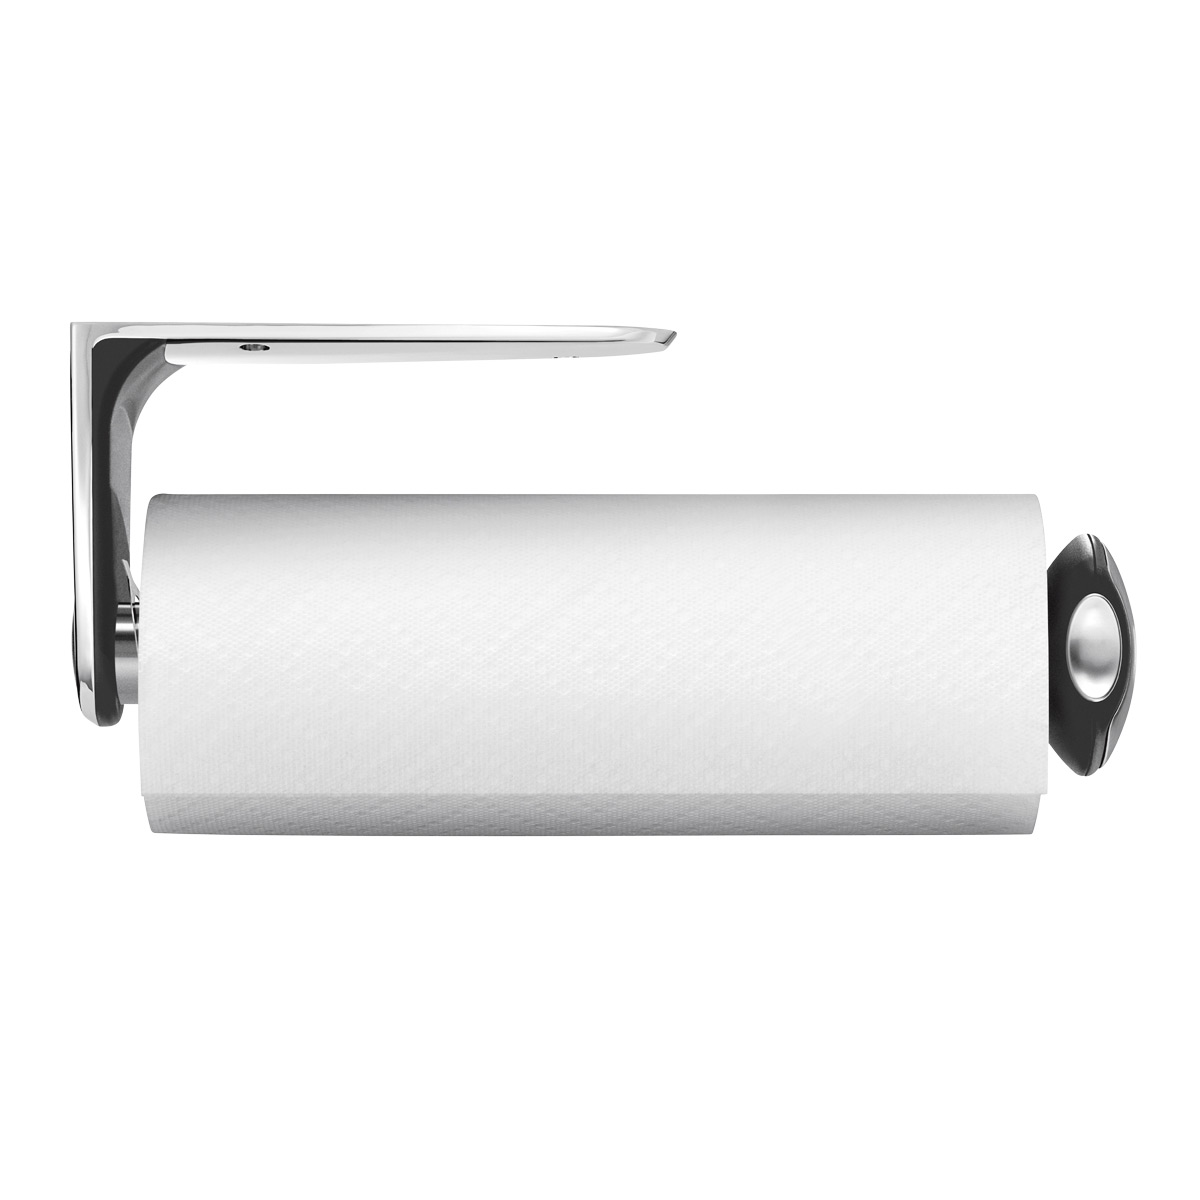 https://www.containerstore.com/catalogimages/378184/10046487-SH-Wall-Mount-Paper-Towel-H.jpg